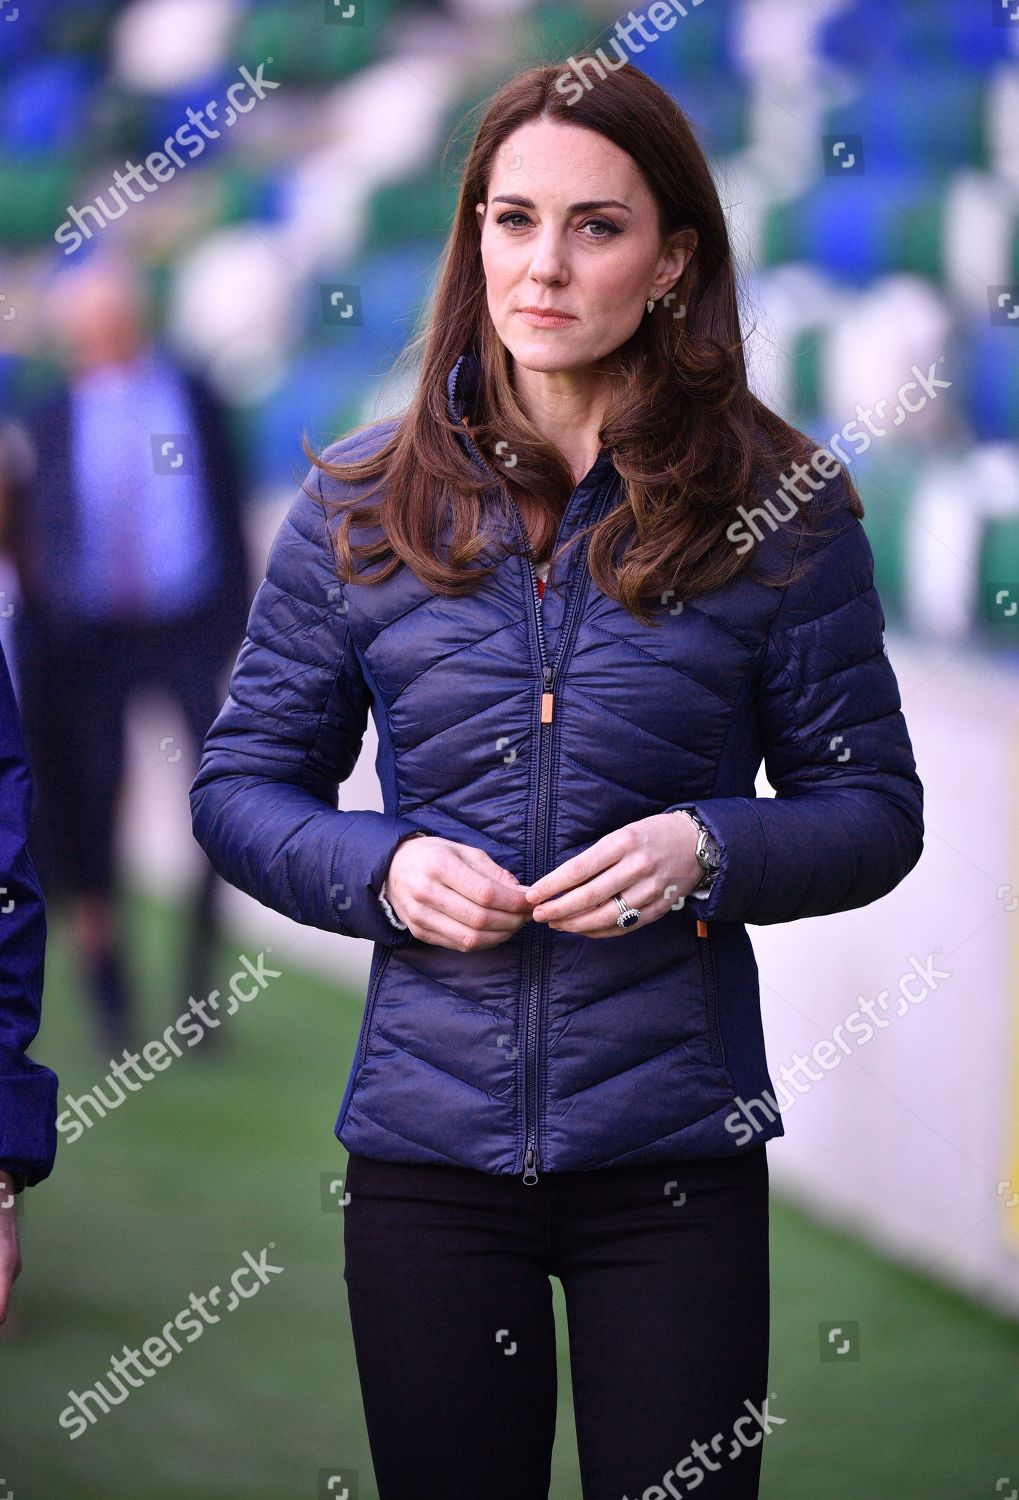 prince-william-and-catherine-duchess-of-cambridge-visit-to-northern-ireland-shutterstock-editorial-10122058aa.jpg